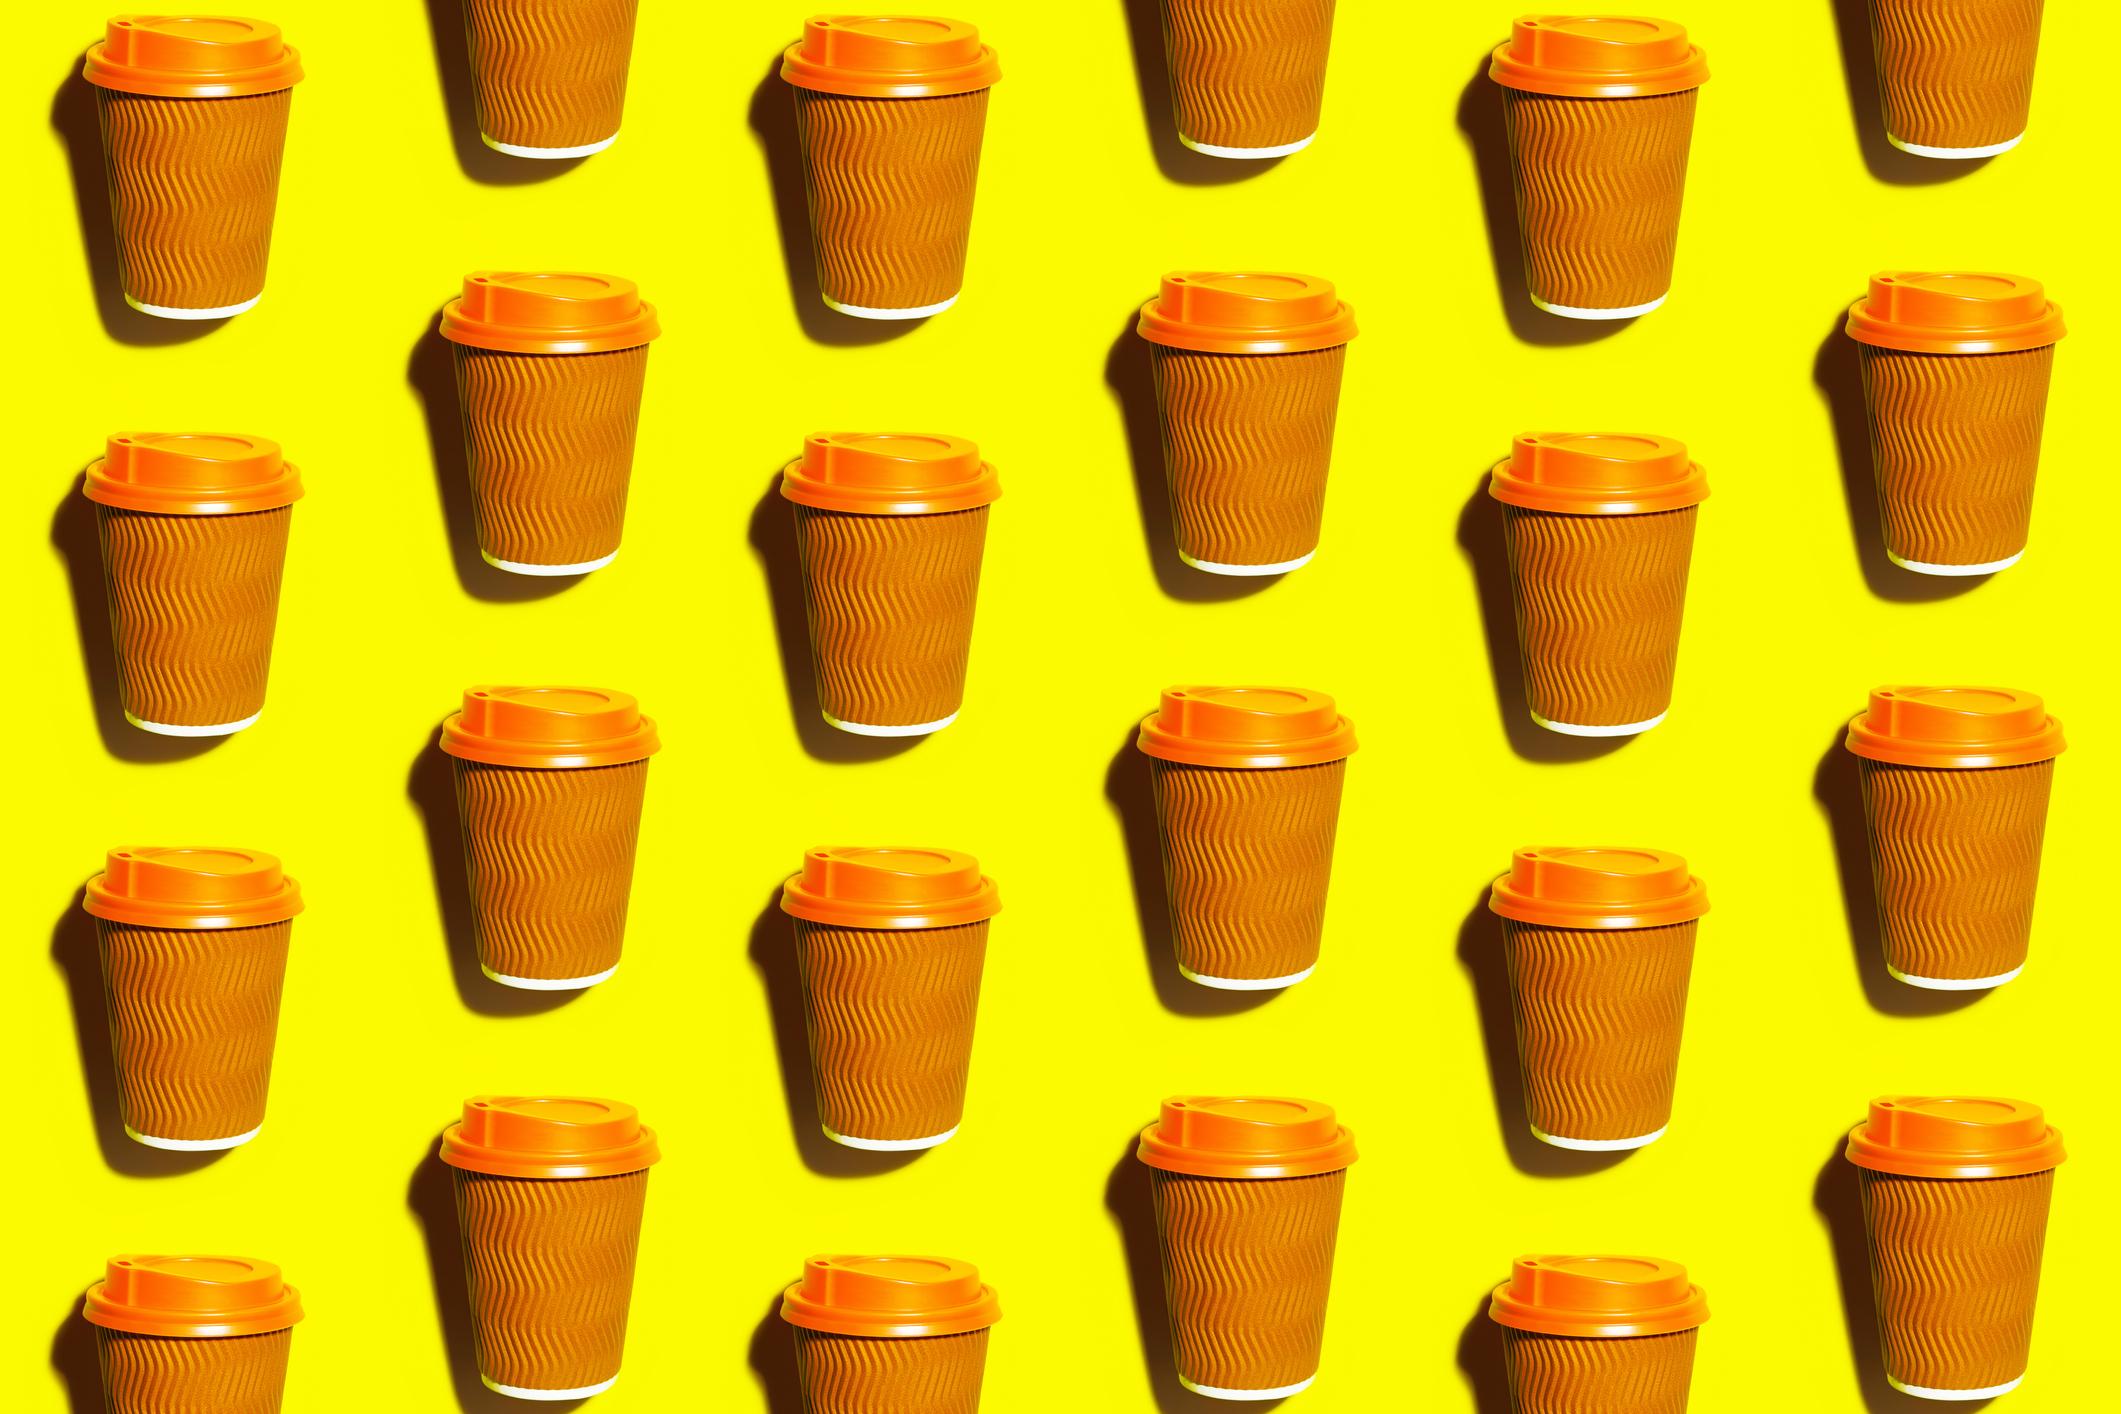  Coffee cup with orange lid on a yellow desk. 